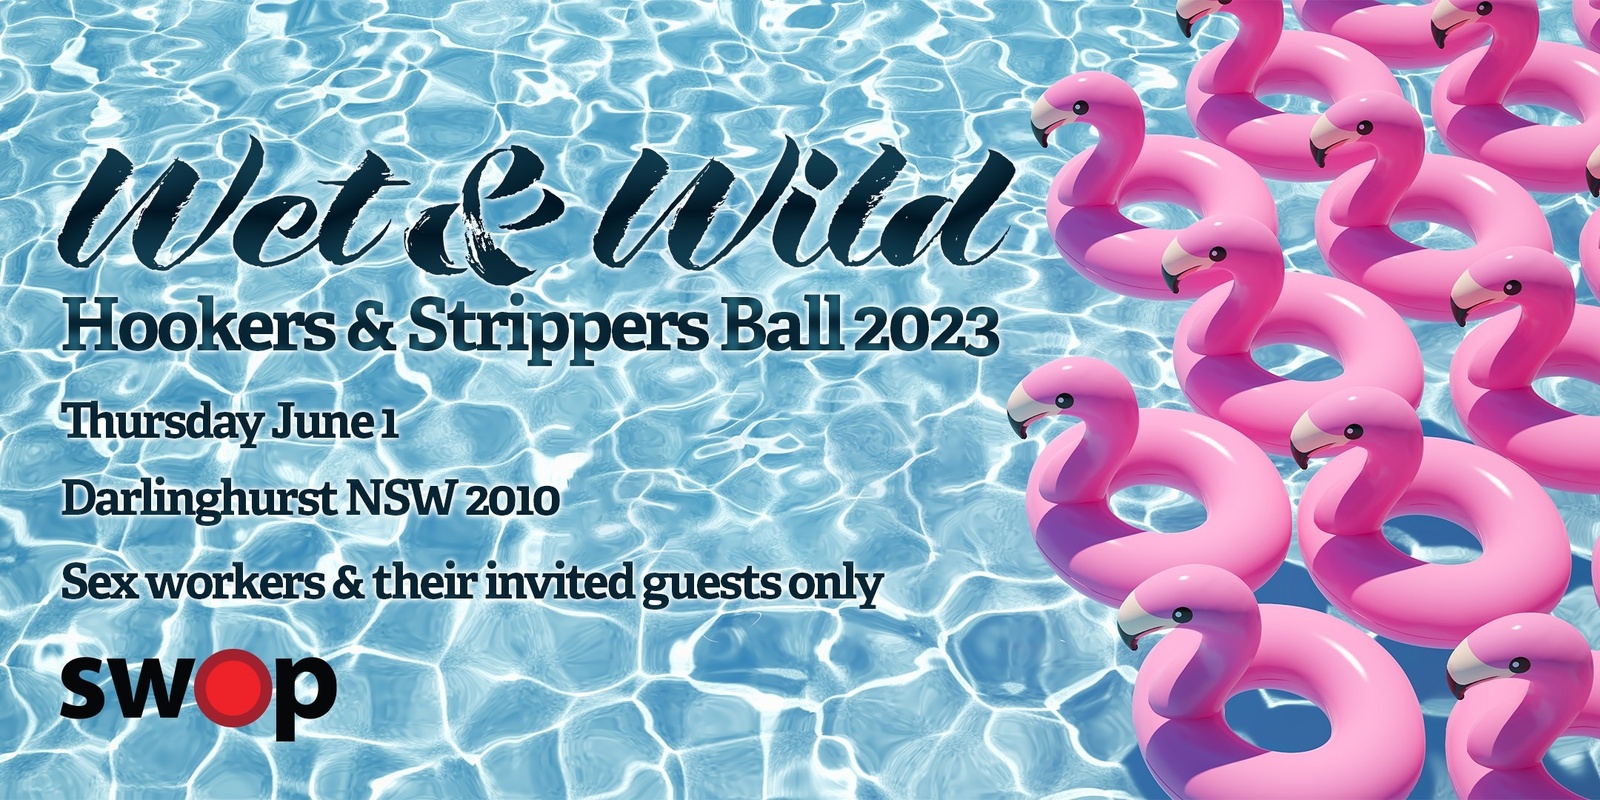 Hookers & Strippers Ball 2023